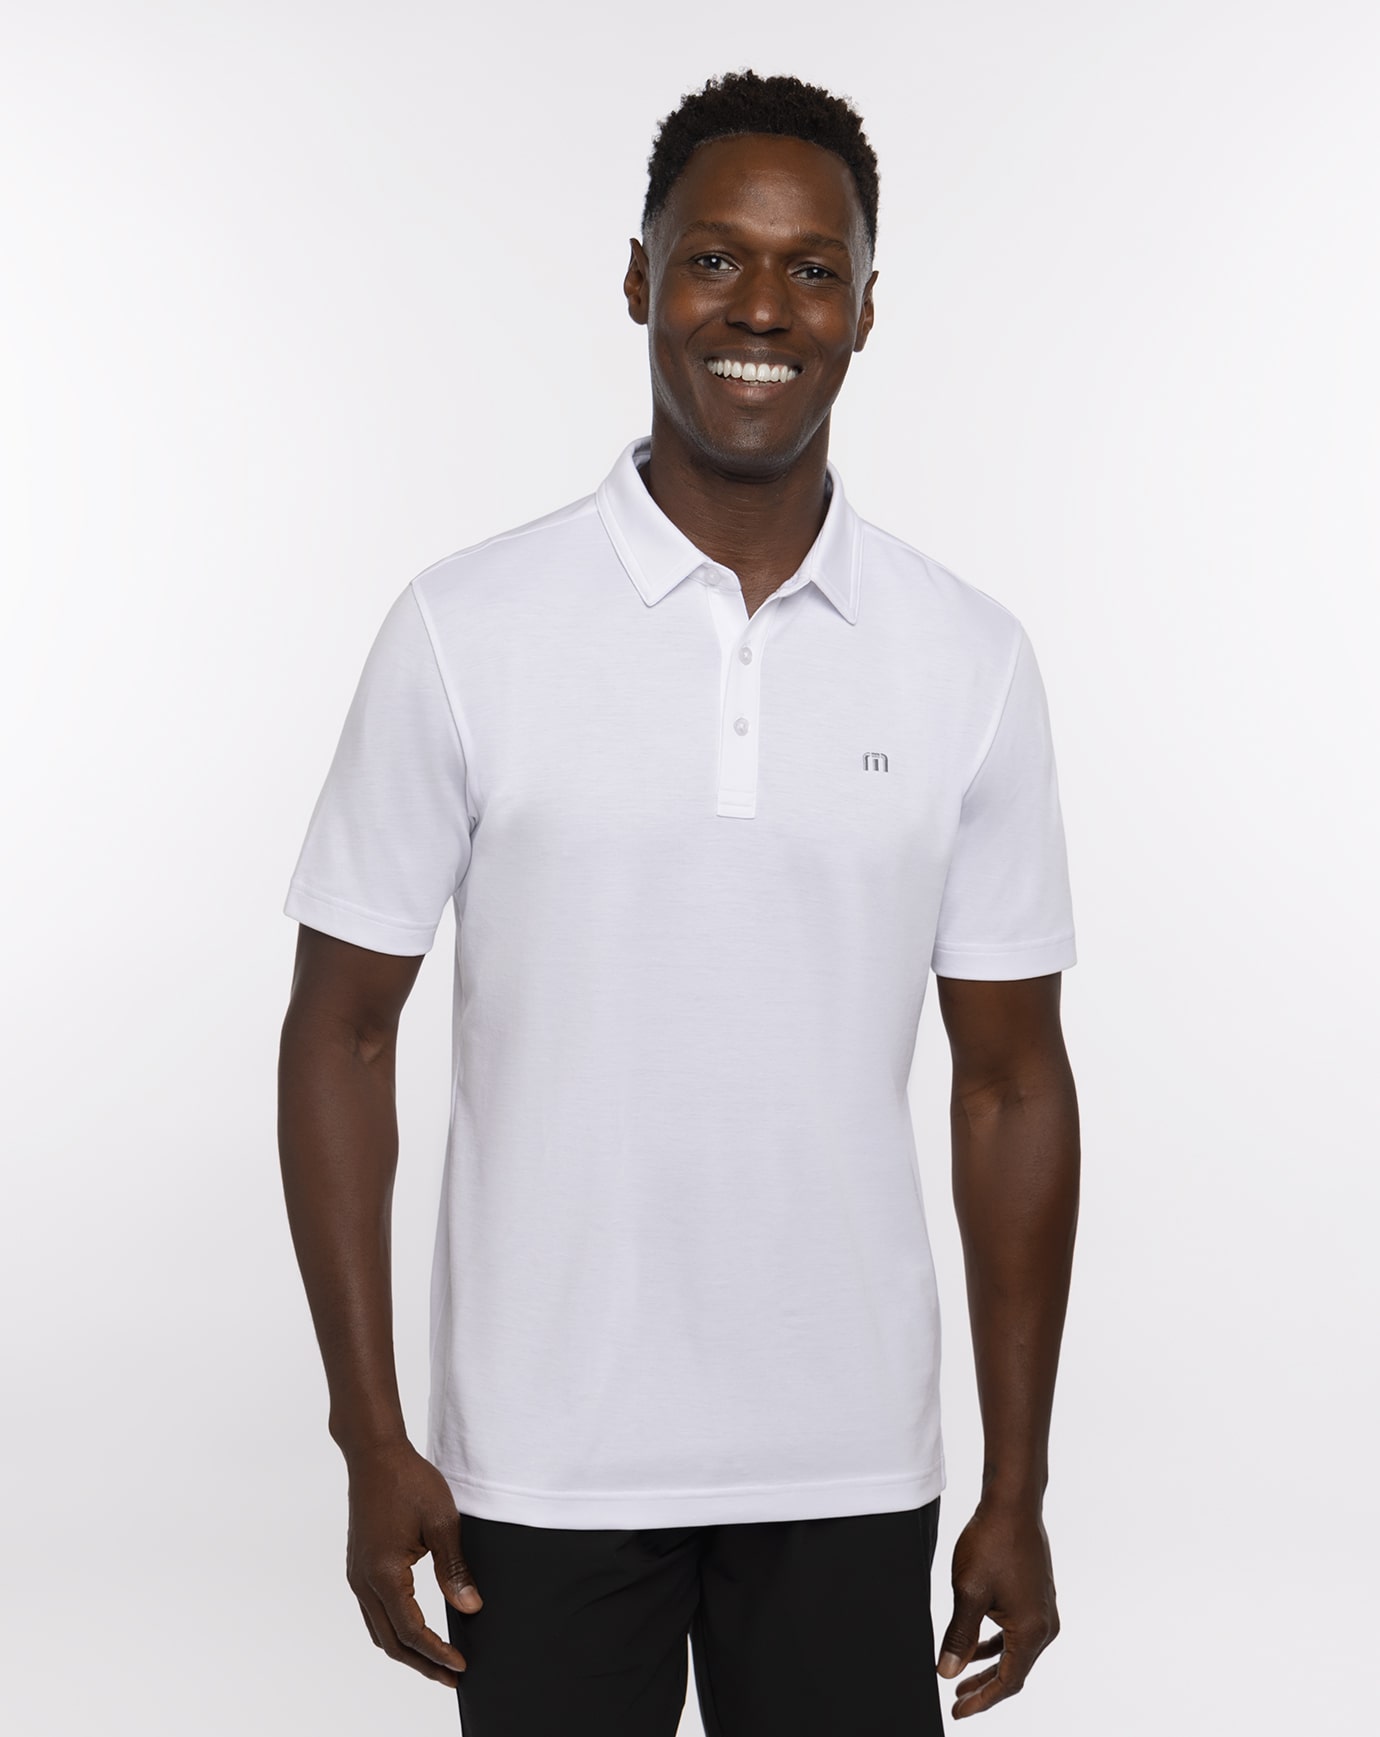 Related Product - TOUR GUIDE POLO